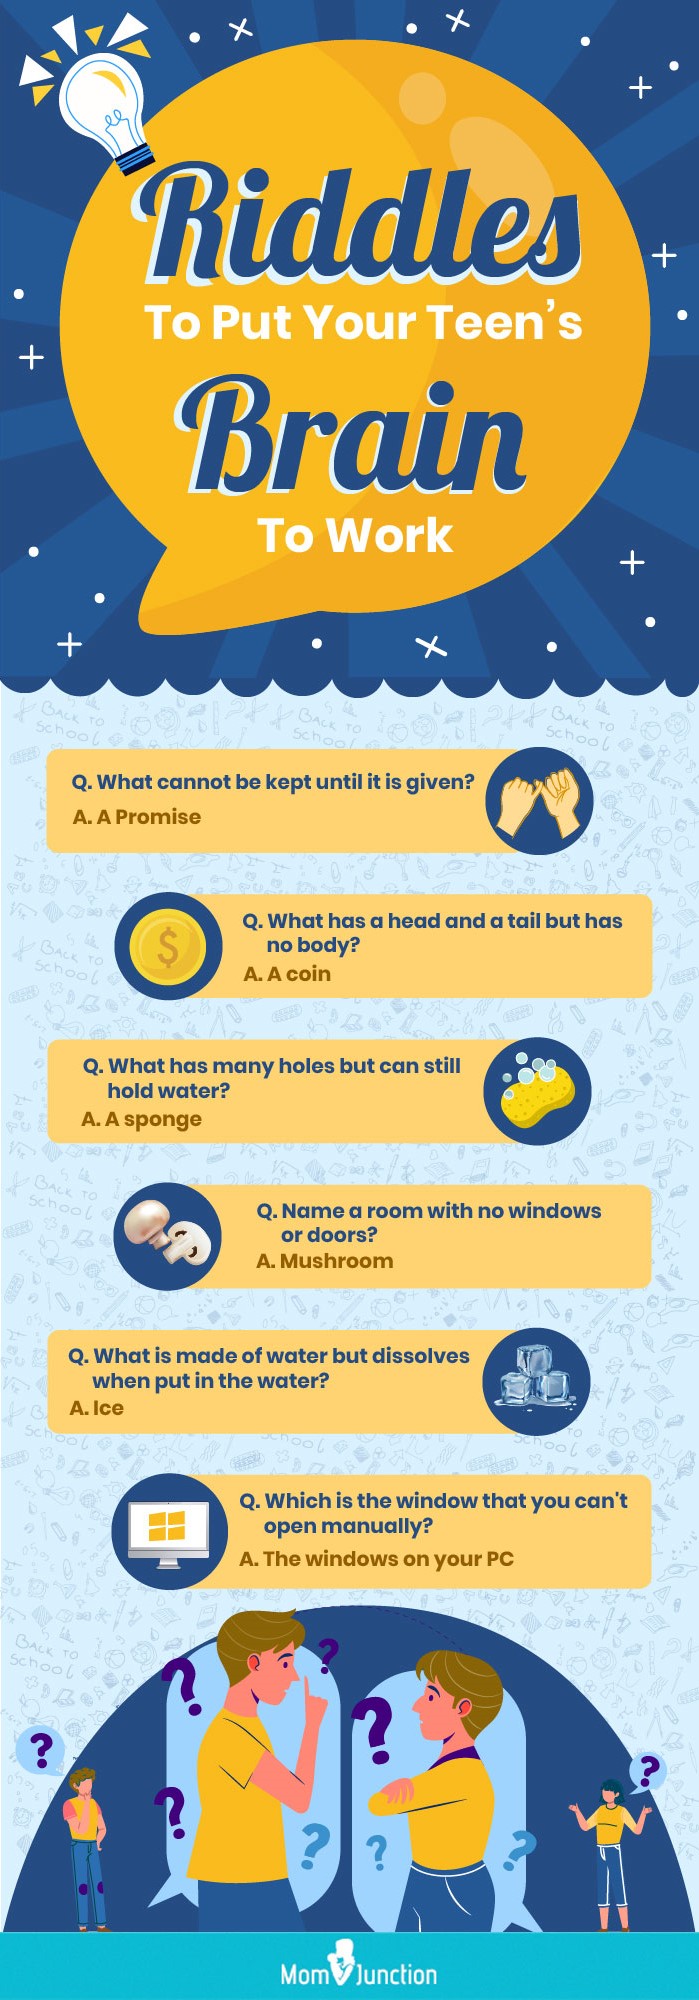 riddles to put your teens brain to work [infographic]